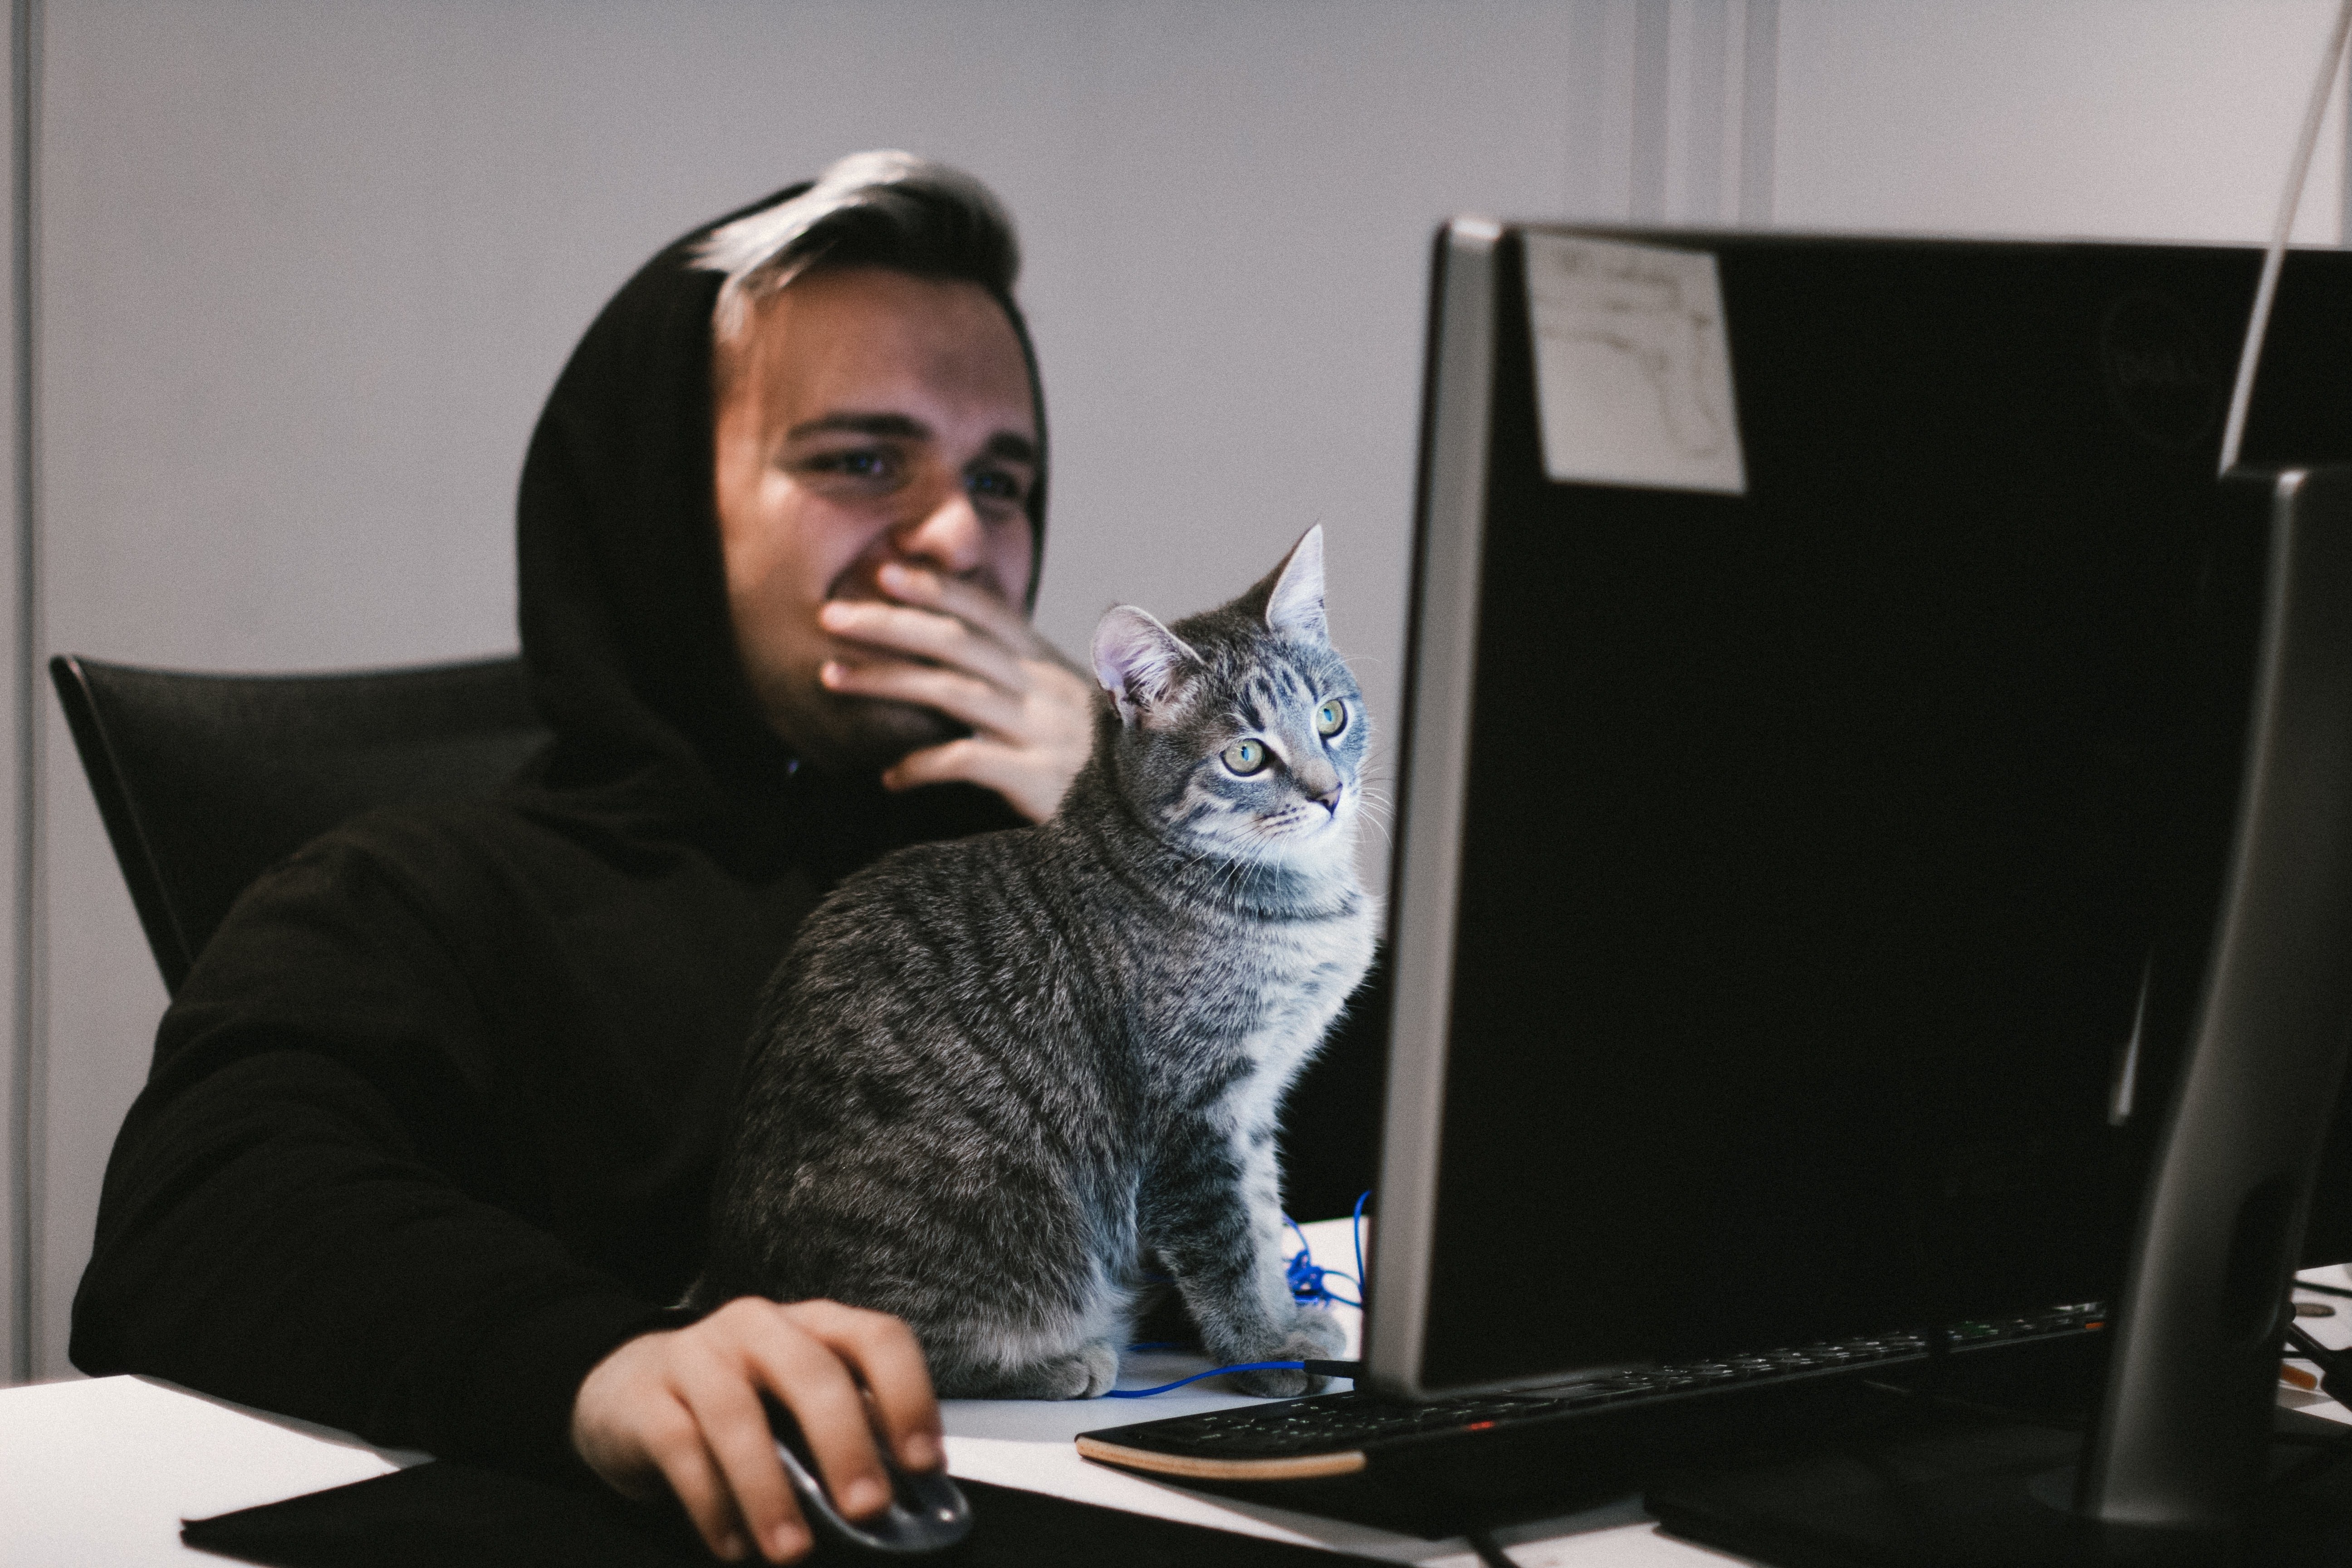 Surprise-reaction-at-computer-with-cat.jpg#asset:1702